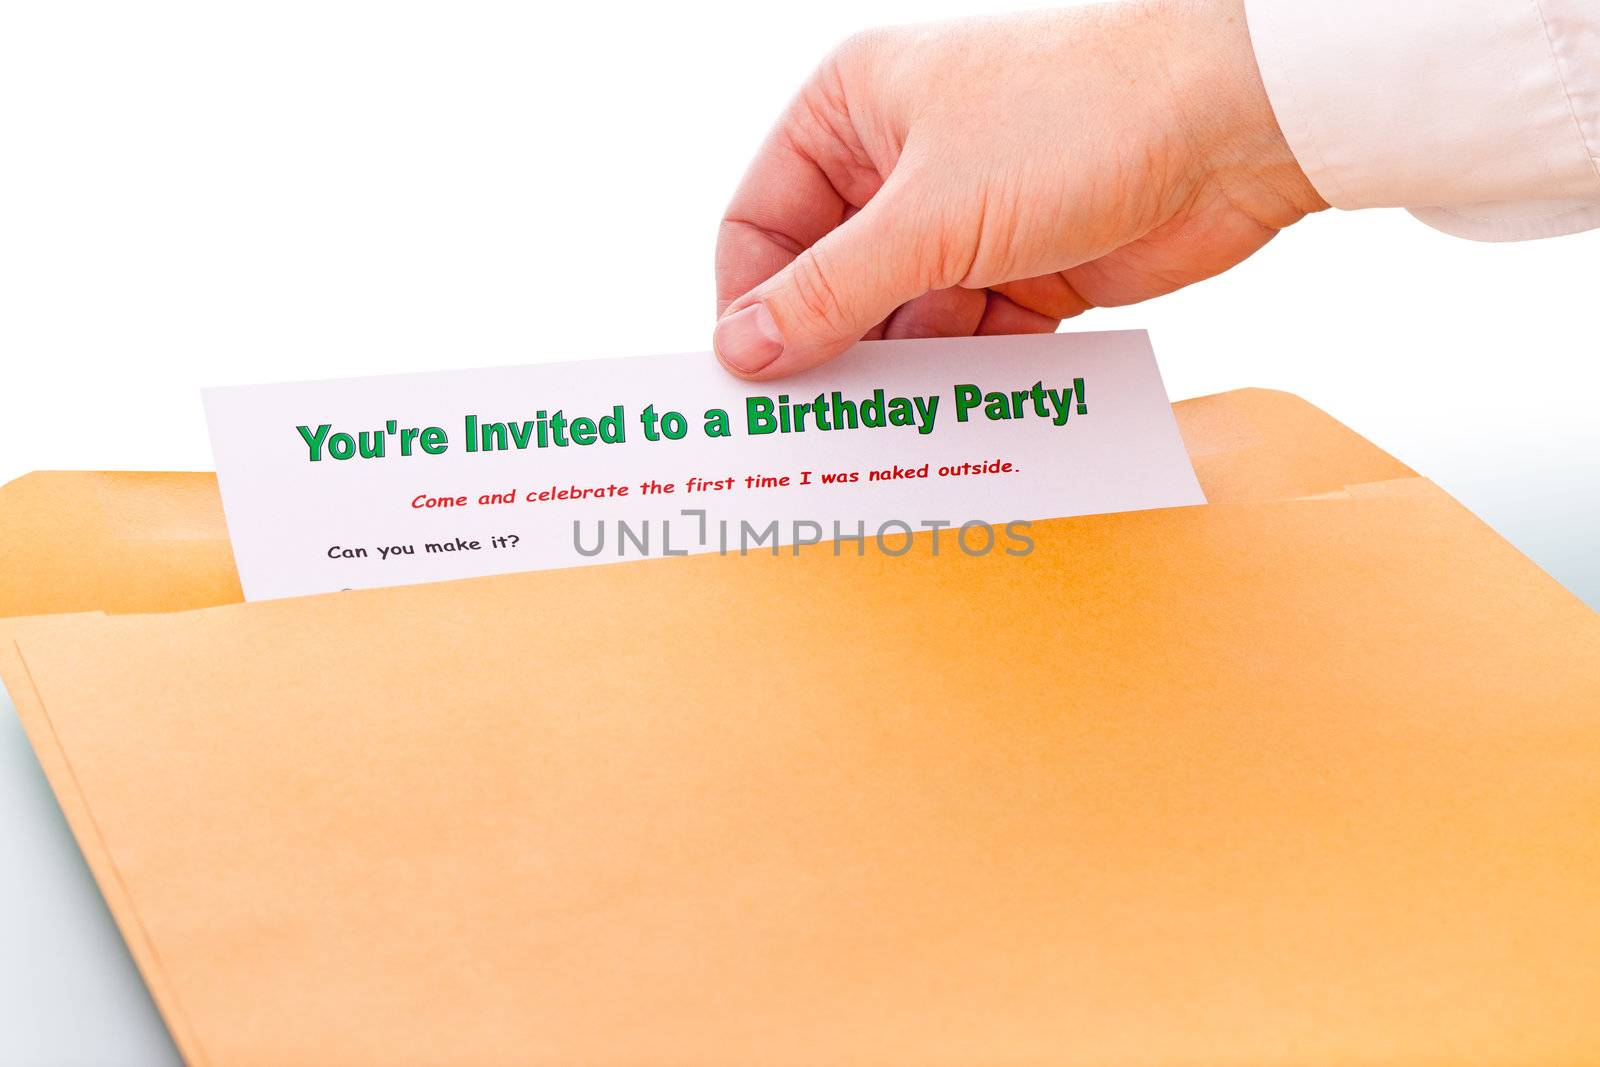 You're invited to a Birthday Party ! by Sergieiev